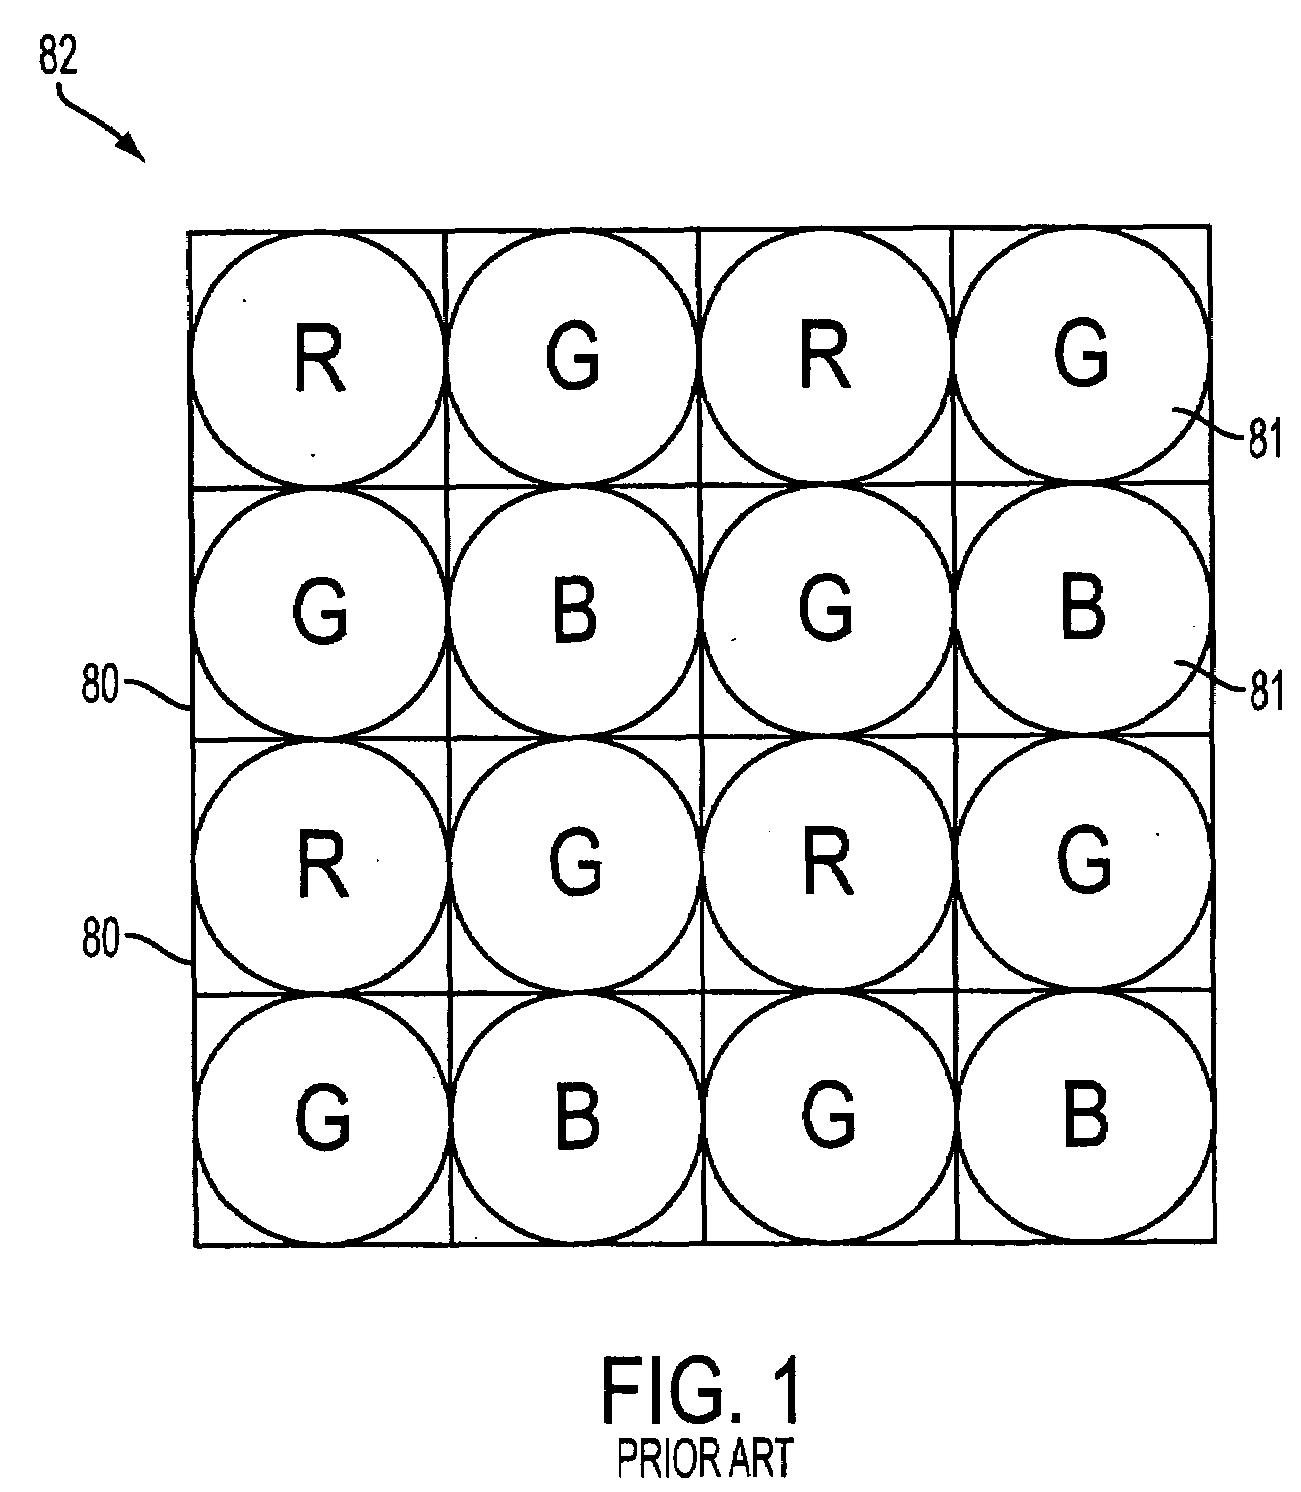 Method and apparatus for image noise reduction using noise models